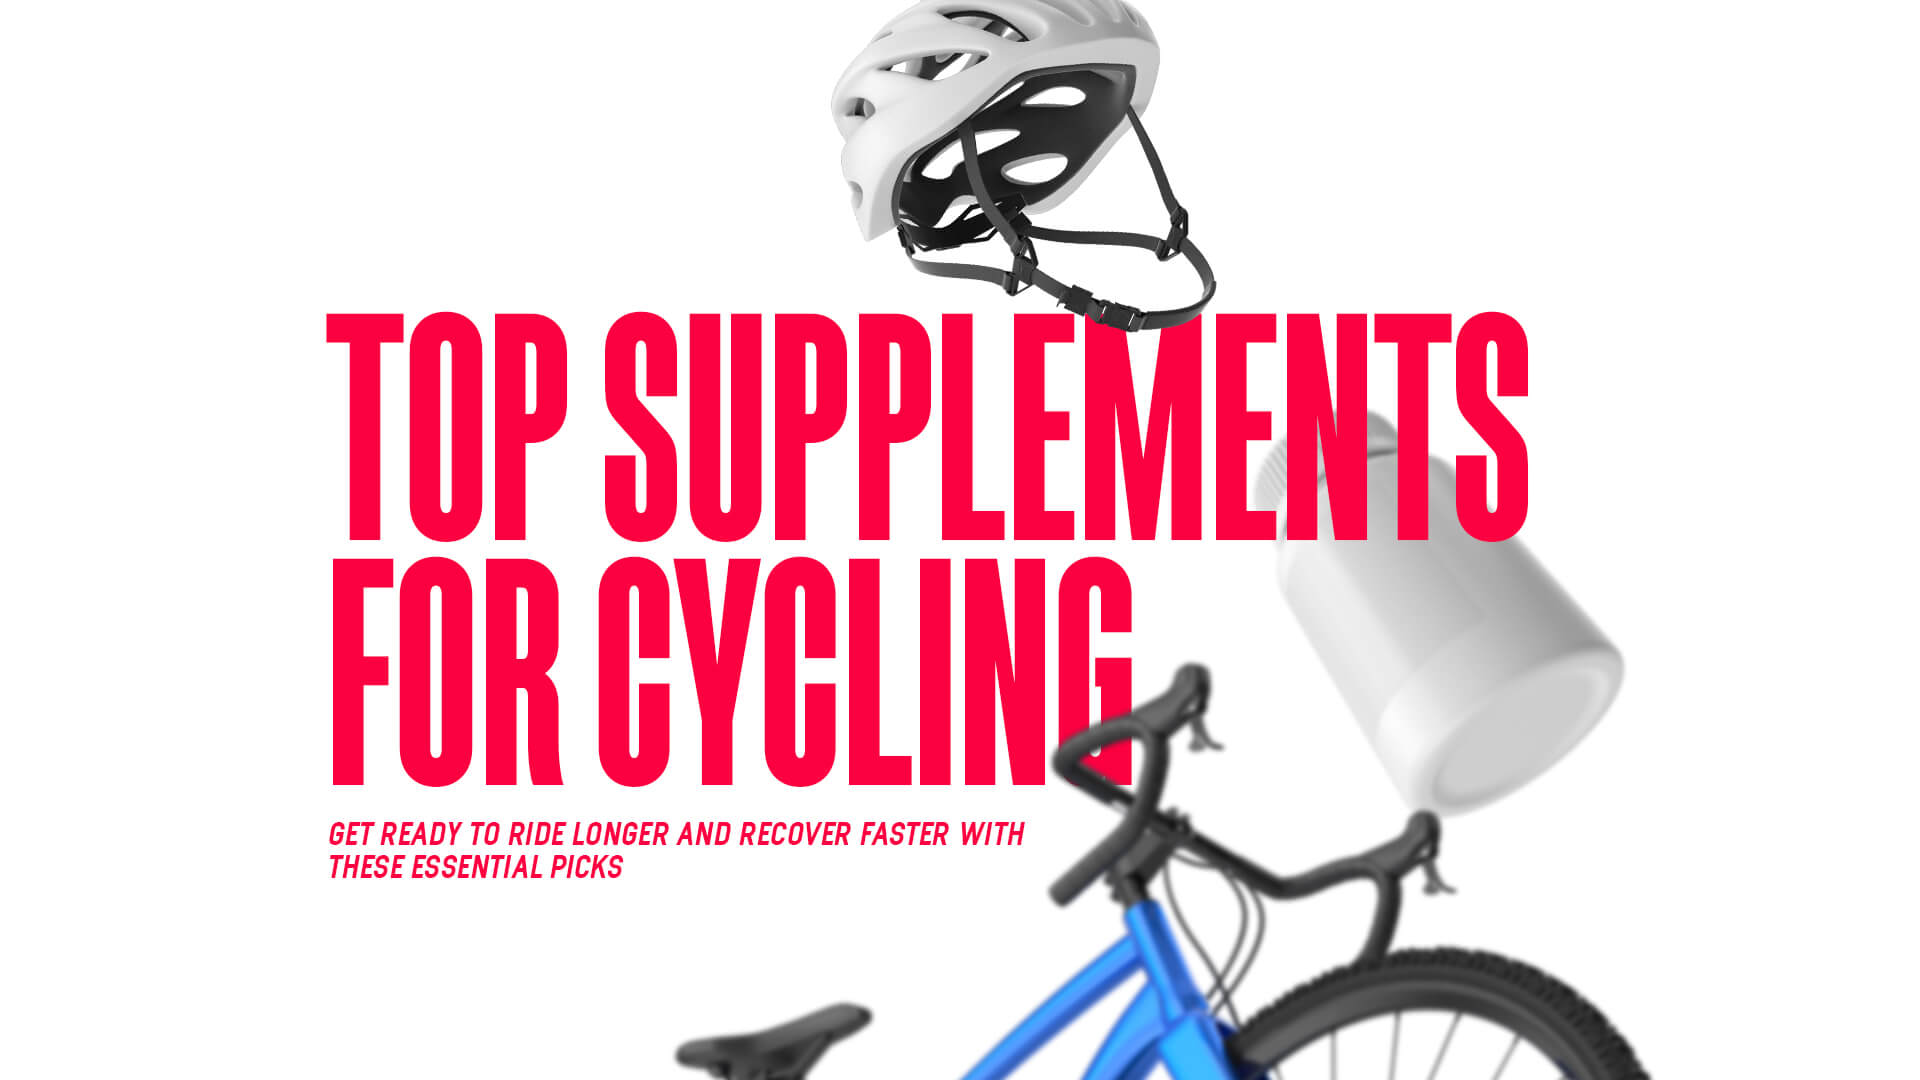 Top Supplements For Cycling - MJ Fitness